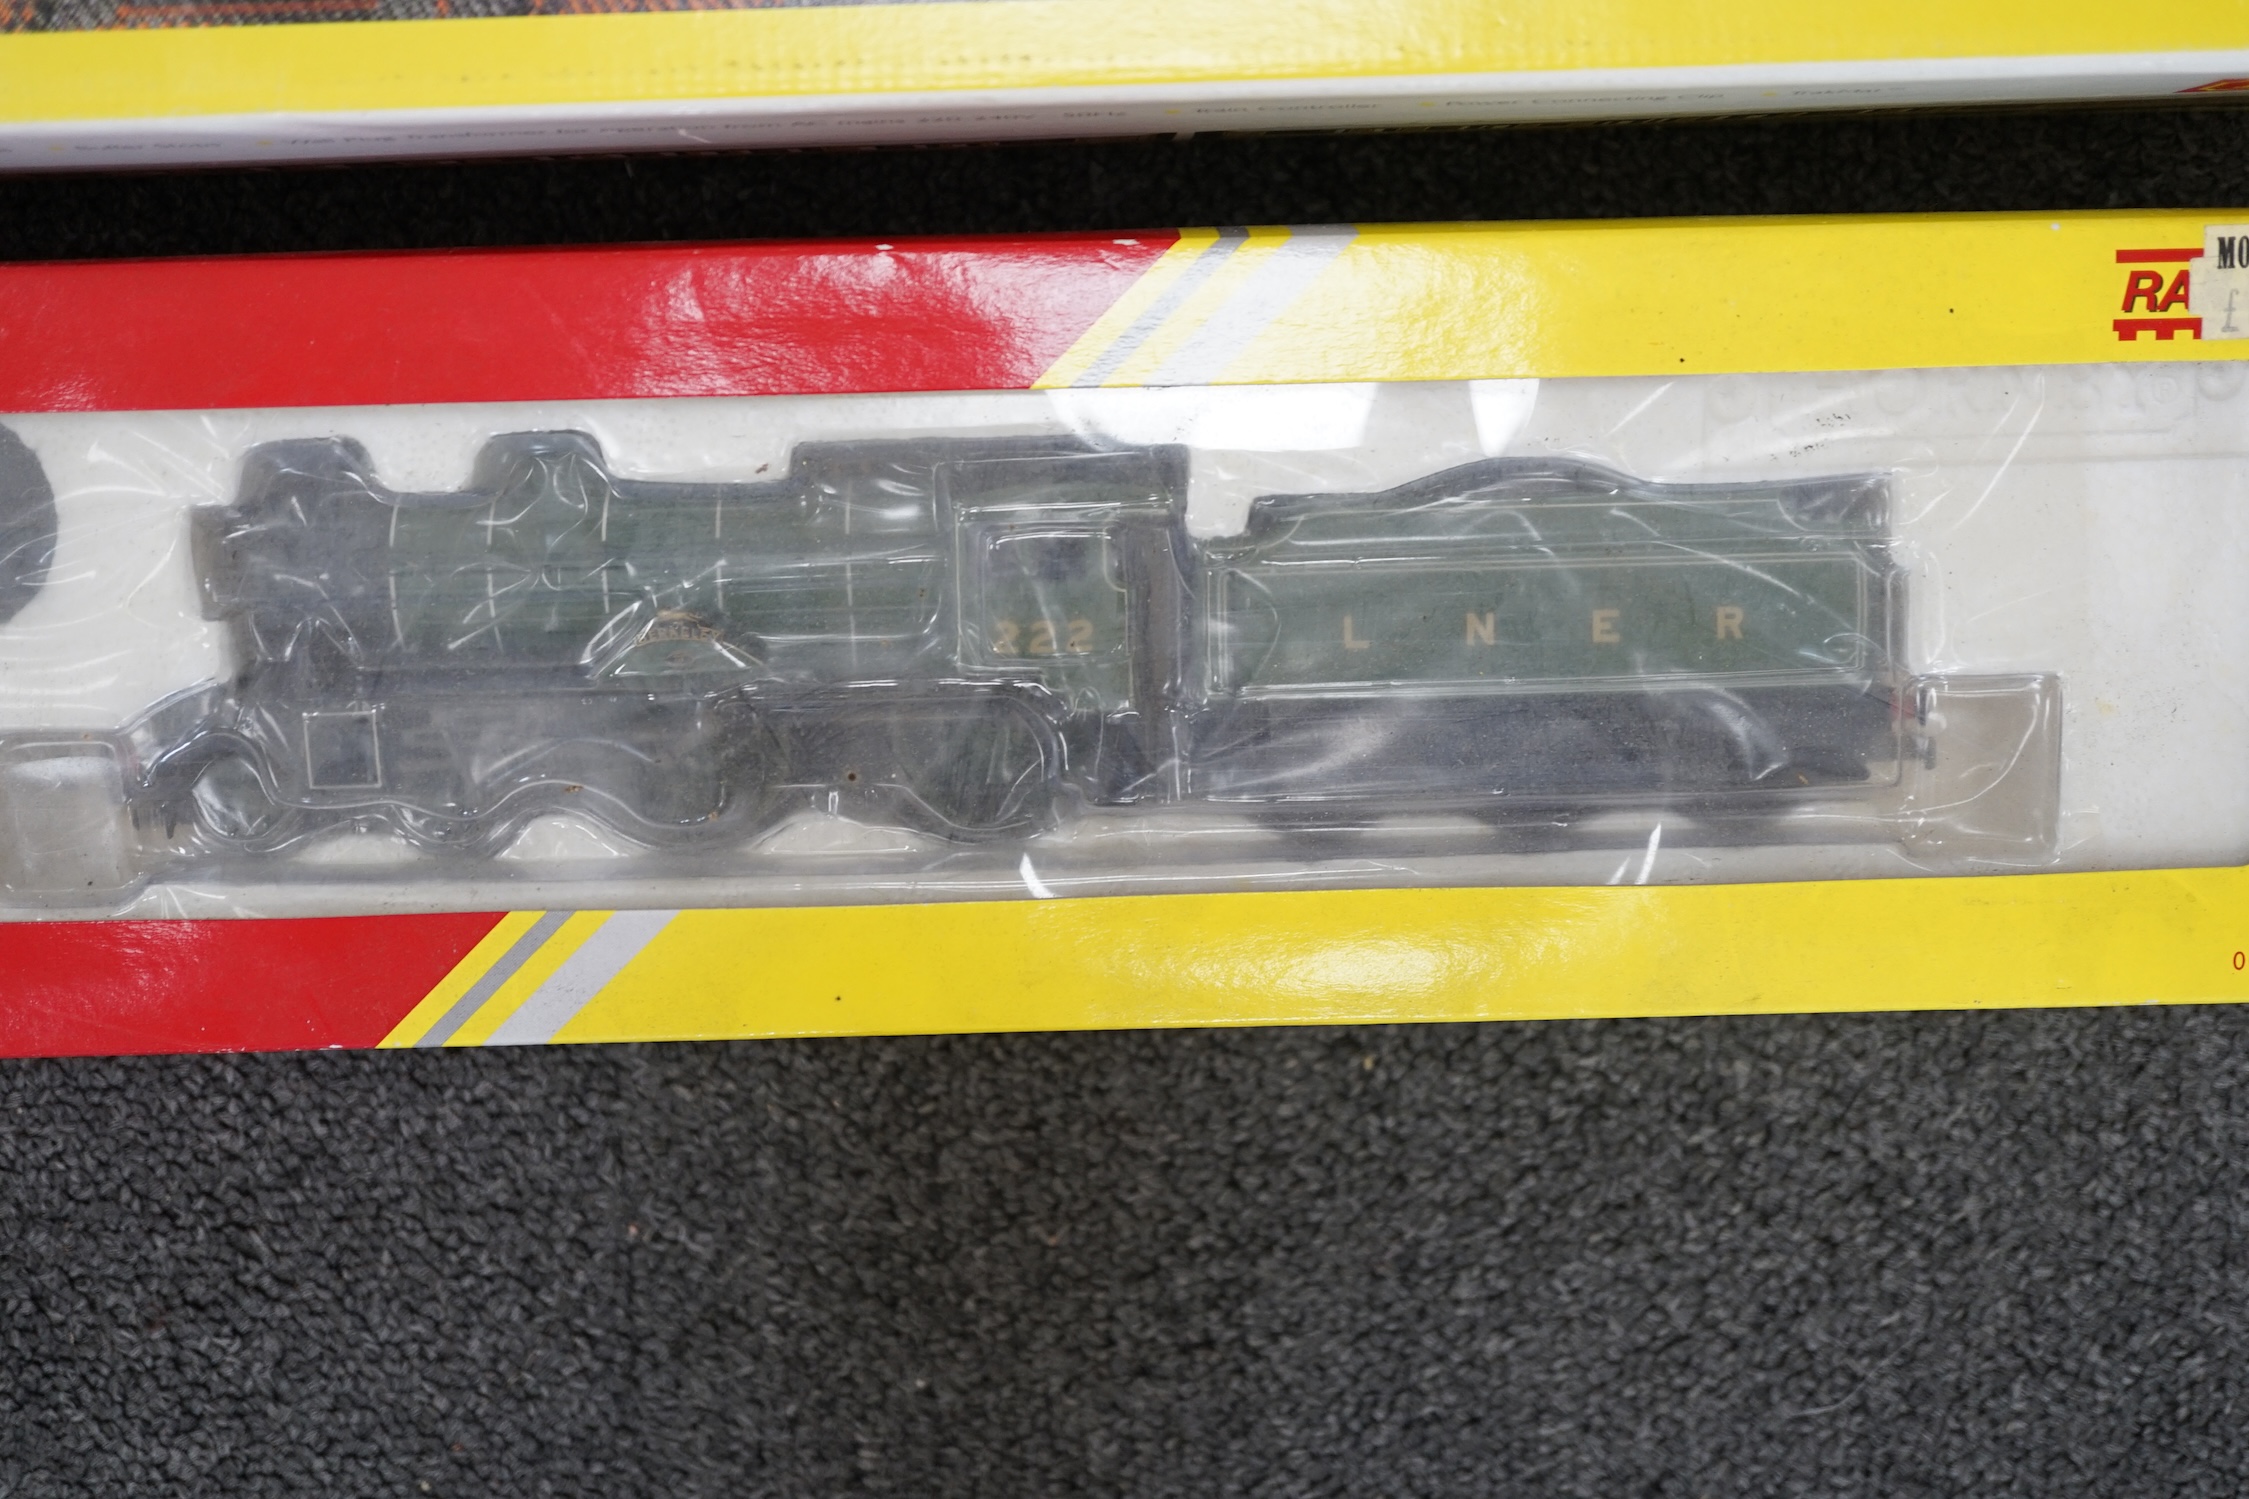 Nine Hornby 00 gauge LNER model railway items, including; a Flying Scotsman train set (R1019) comprising of Flying Scotsman and three teak coaches (missing some accessories and controllers), two additional tender locomot